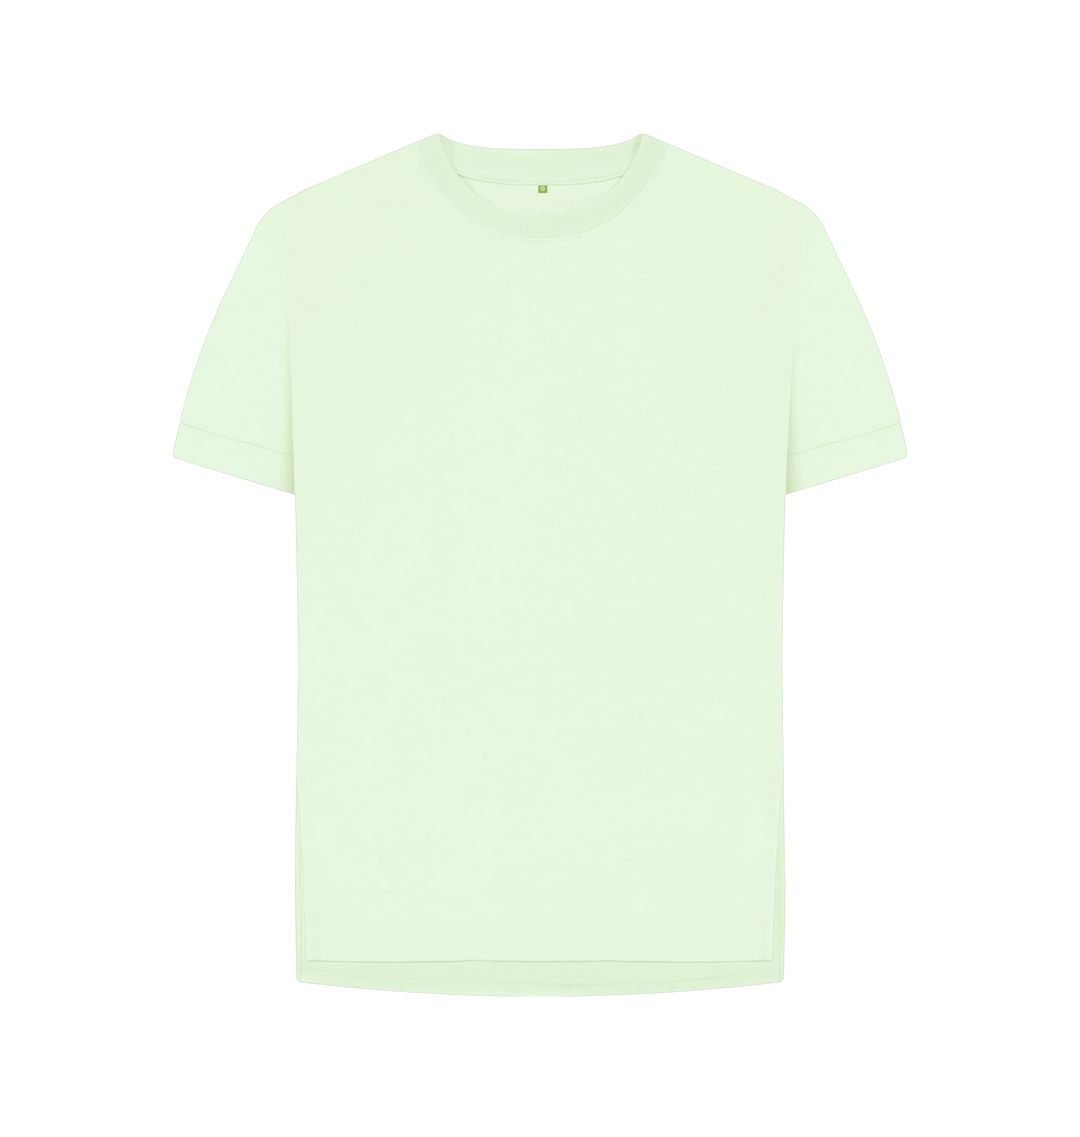 Pastel Green Women's organic cotton relaxed fit t-shirt